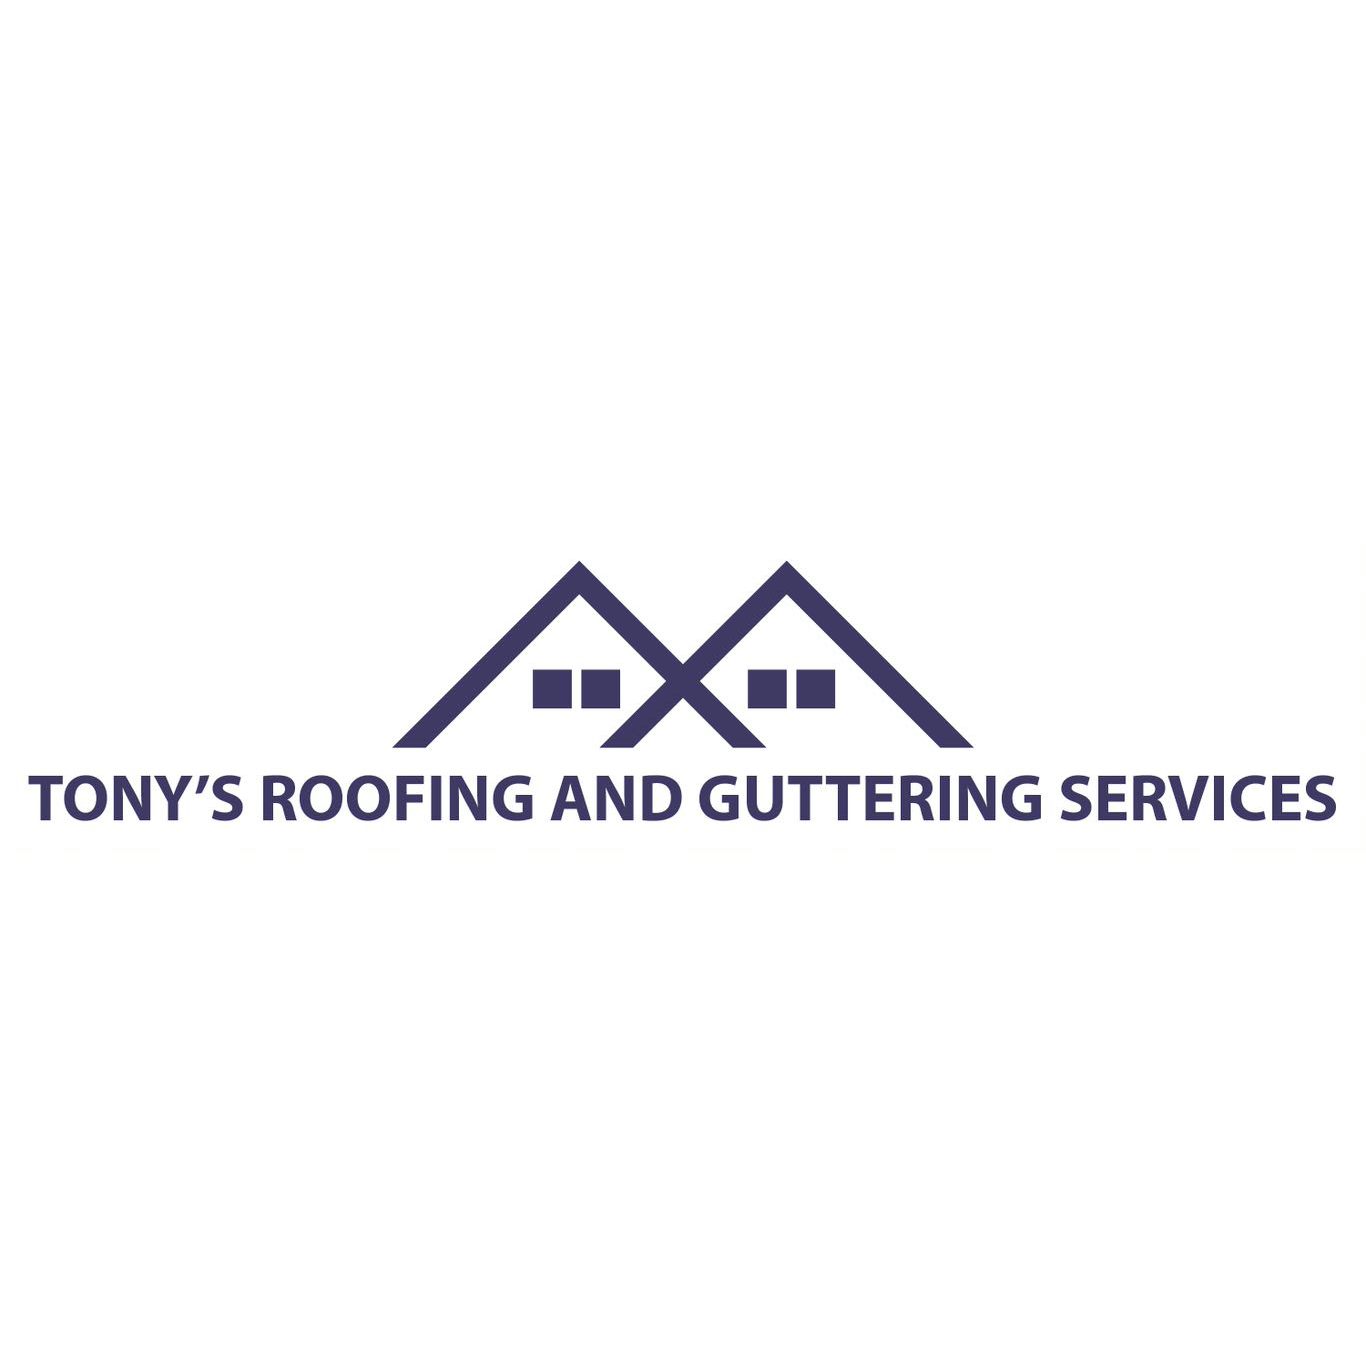 Tony's Roofing and Guttering Services Logo